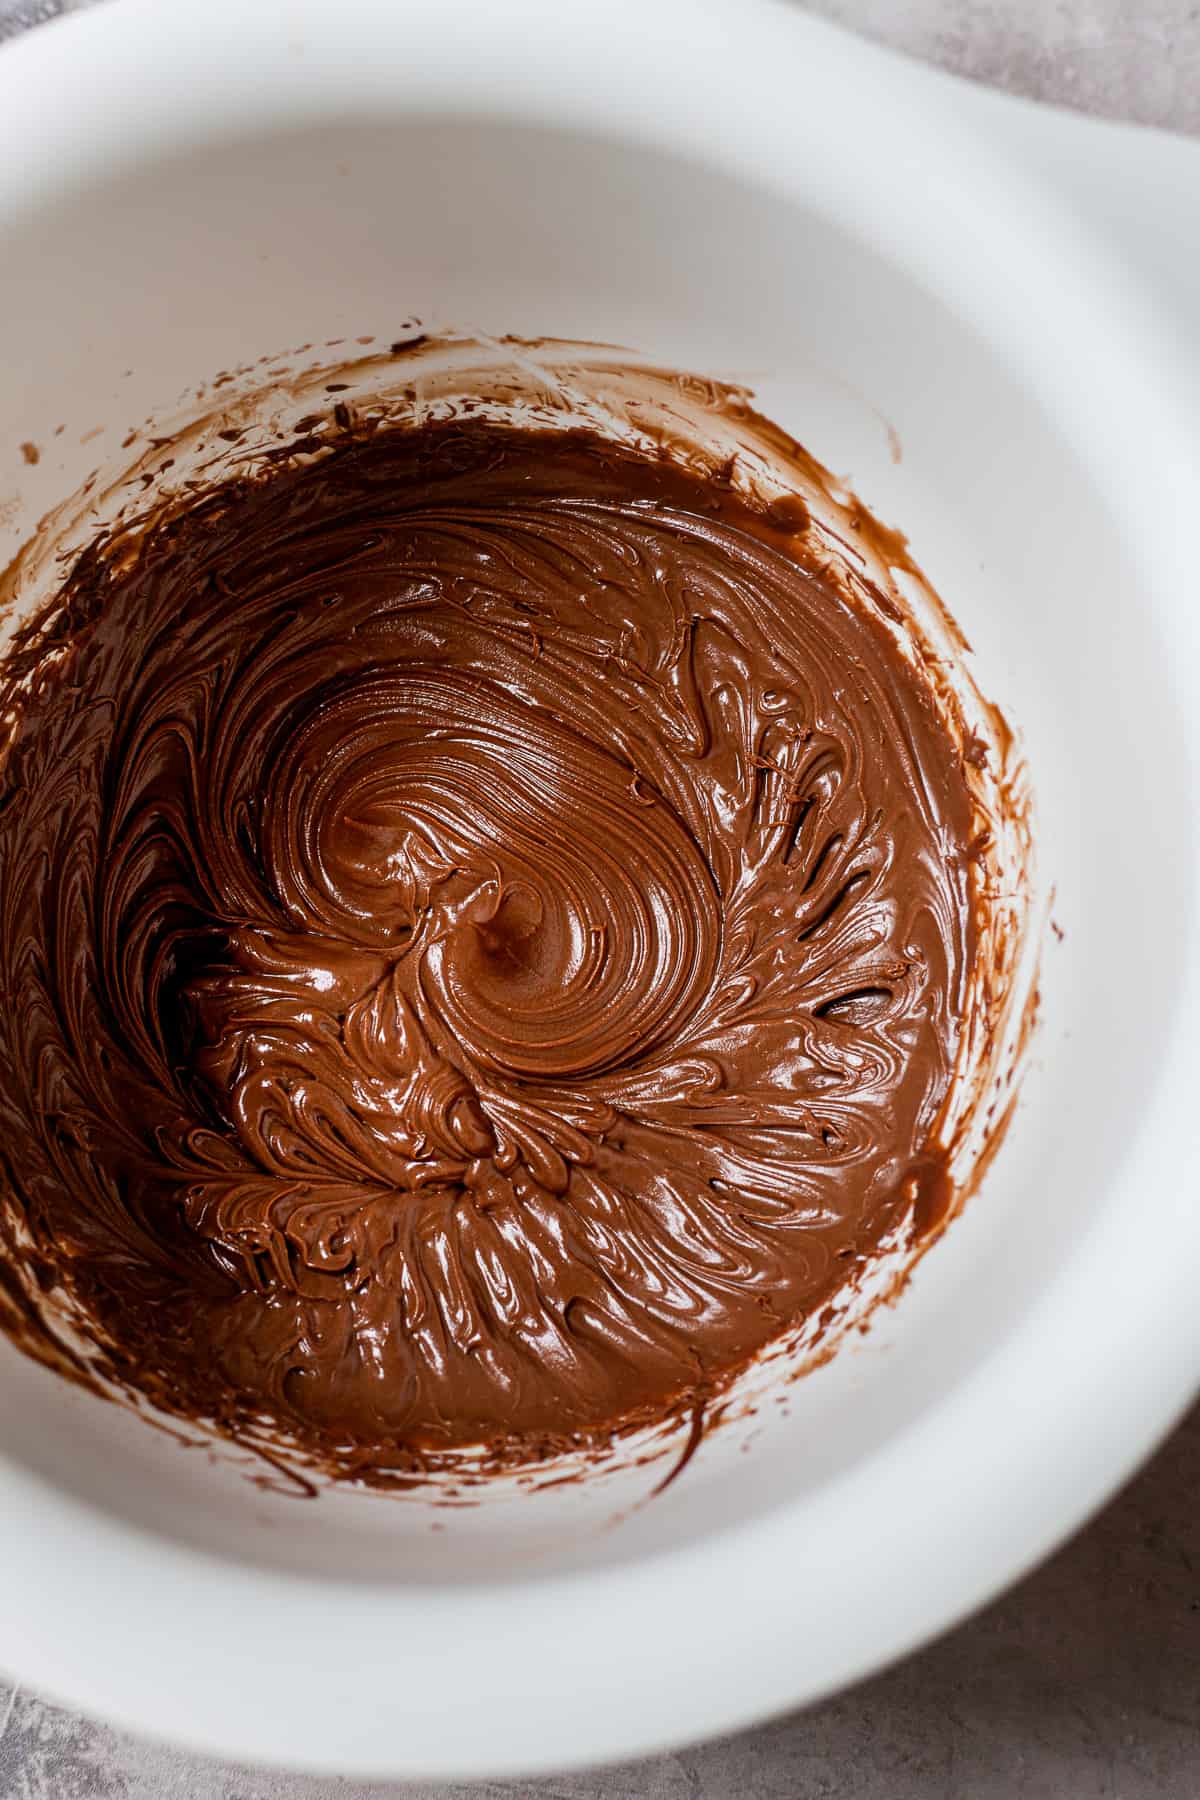 Whipped chocolate mousse in a mixing bowl.